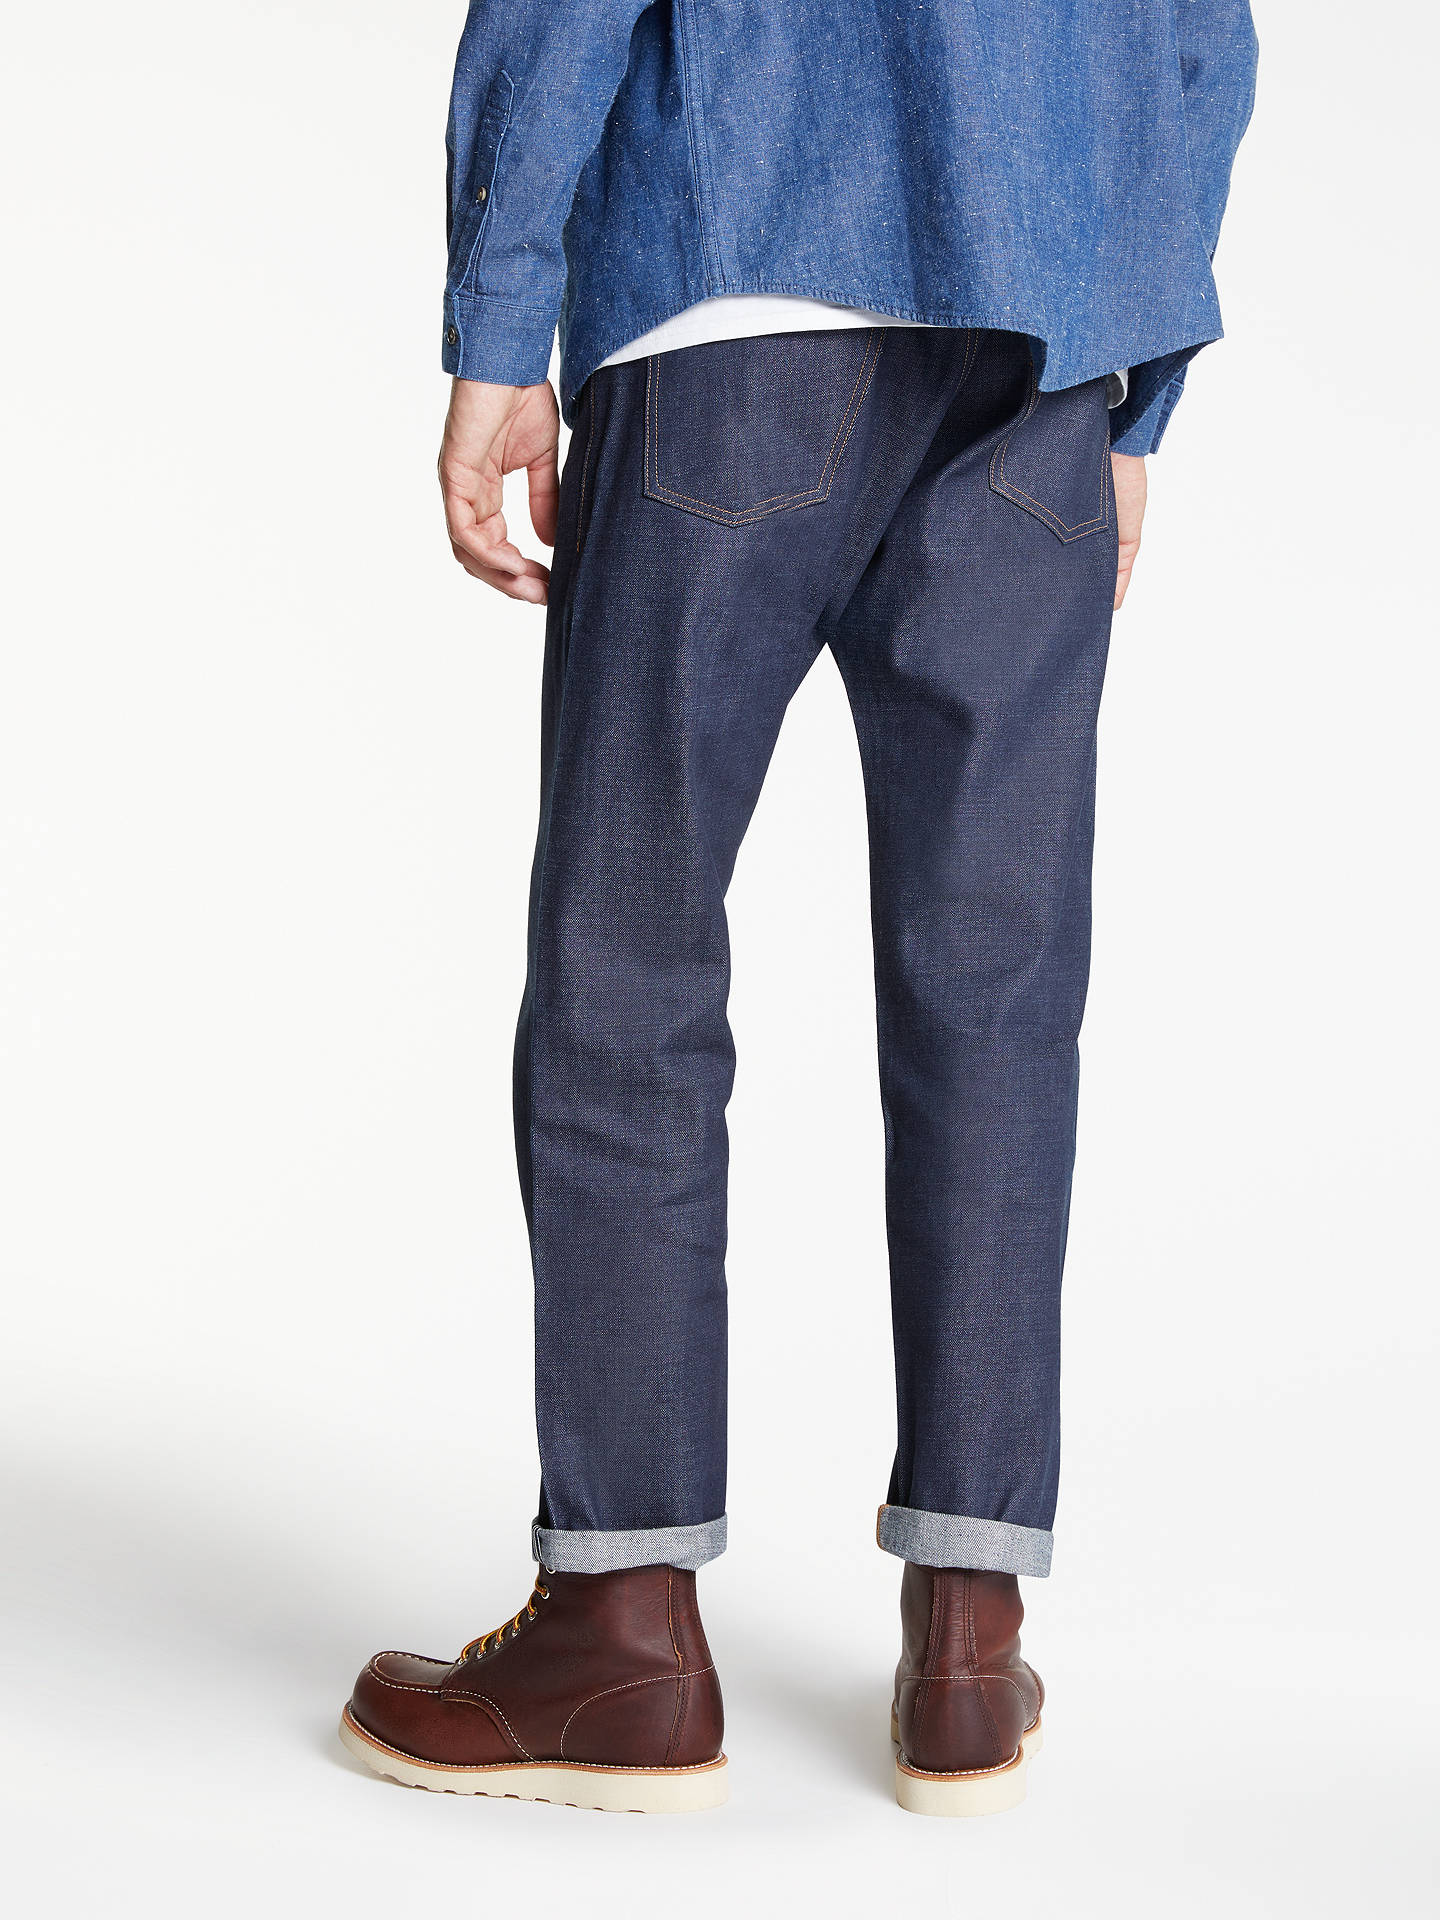 Levi's Made & Crafted Rail Straight Non-Stretch Selvedge Jeans, Dark at ...